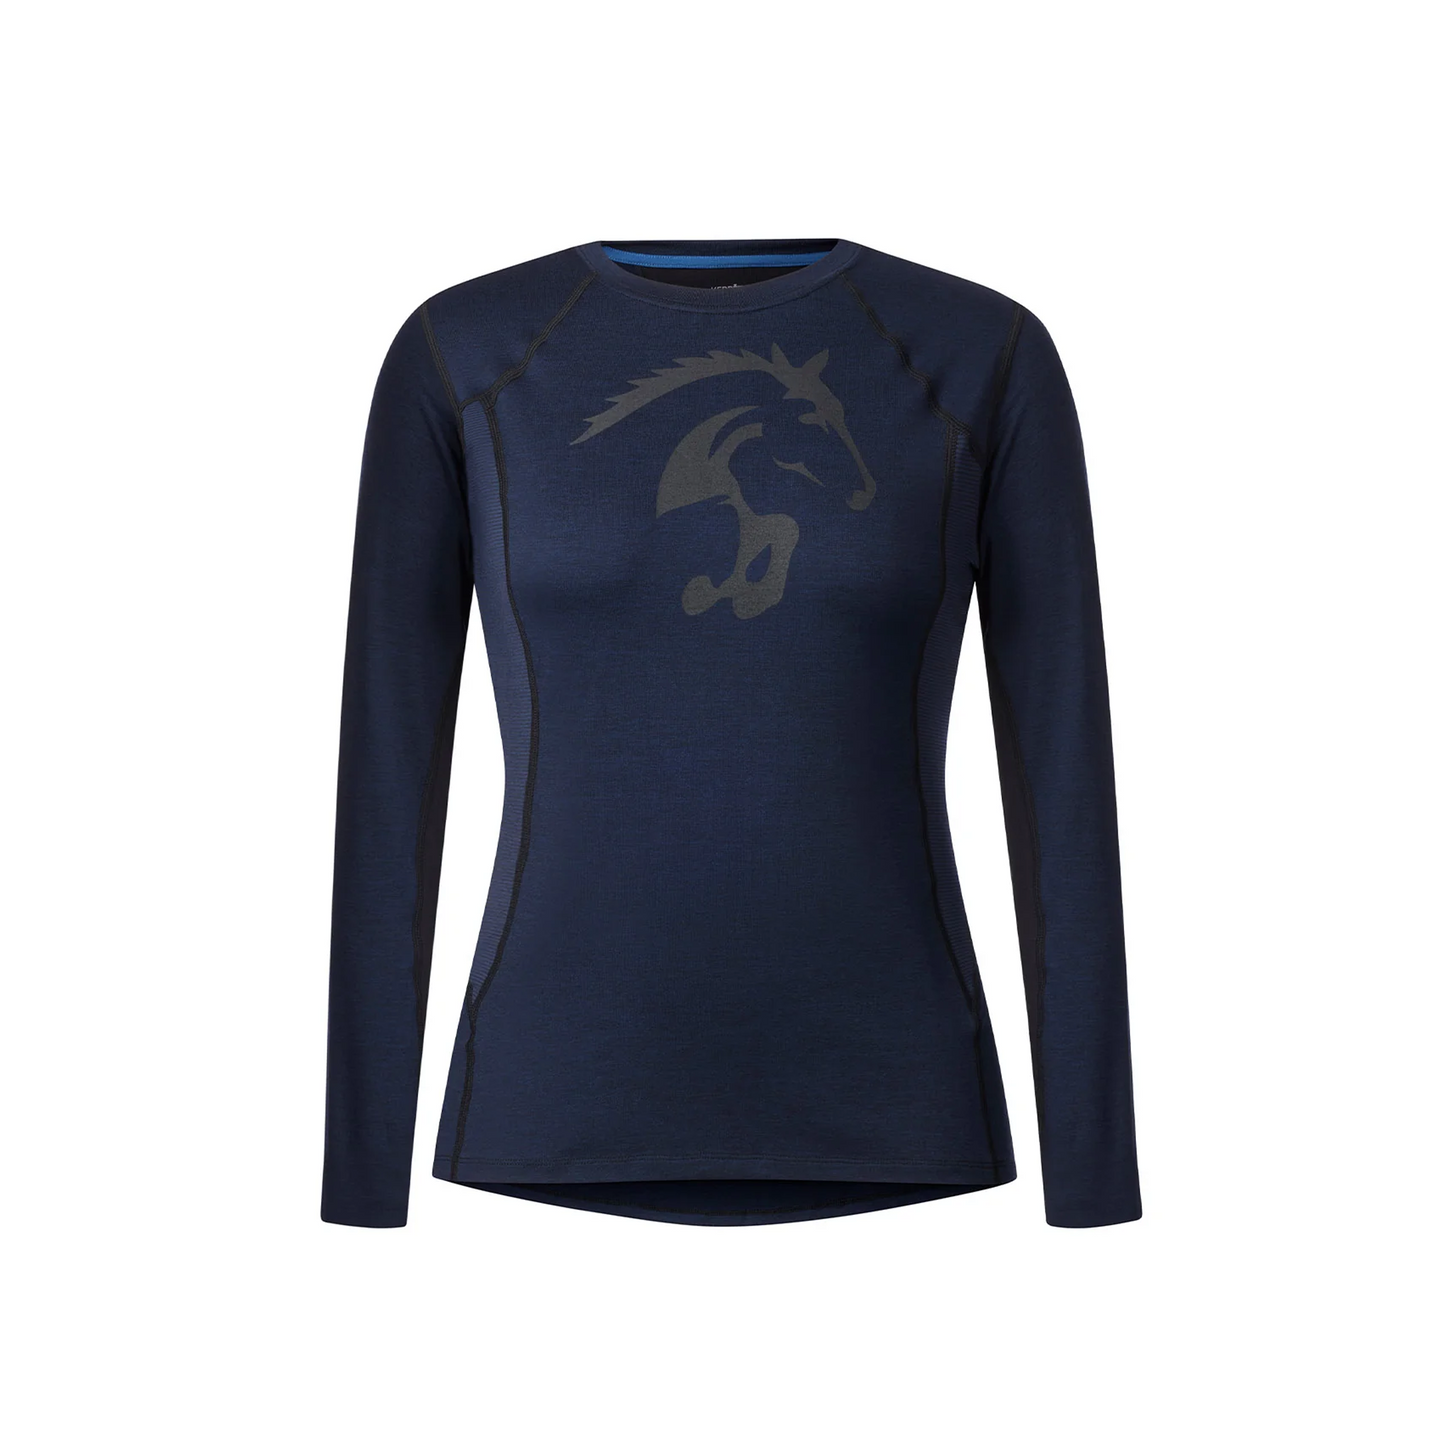 Crescent Base Layer Top